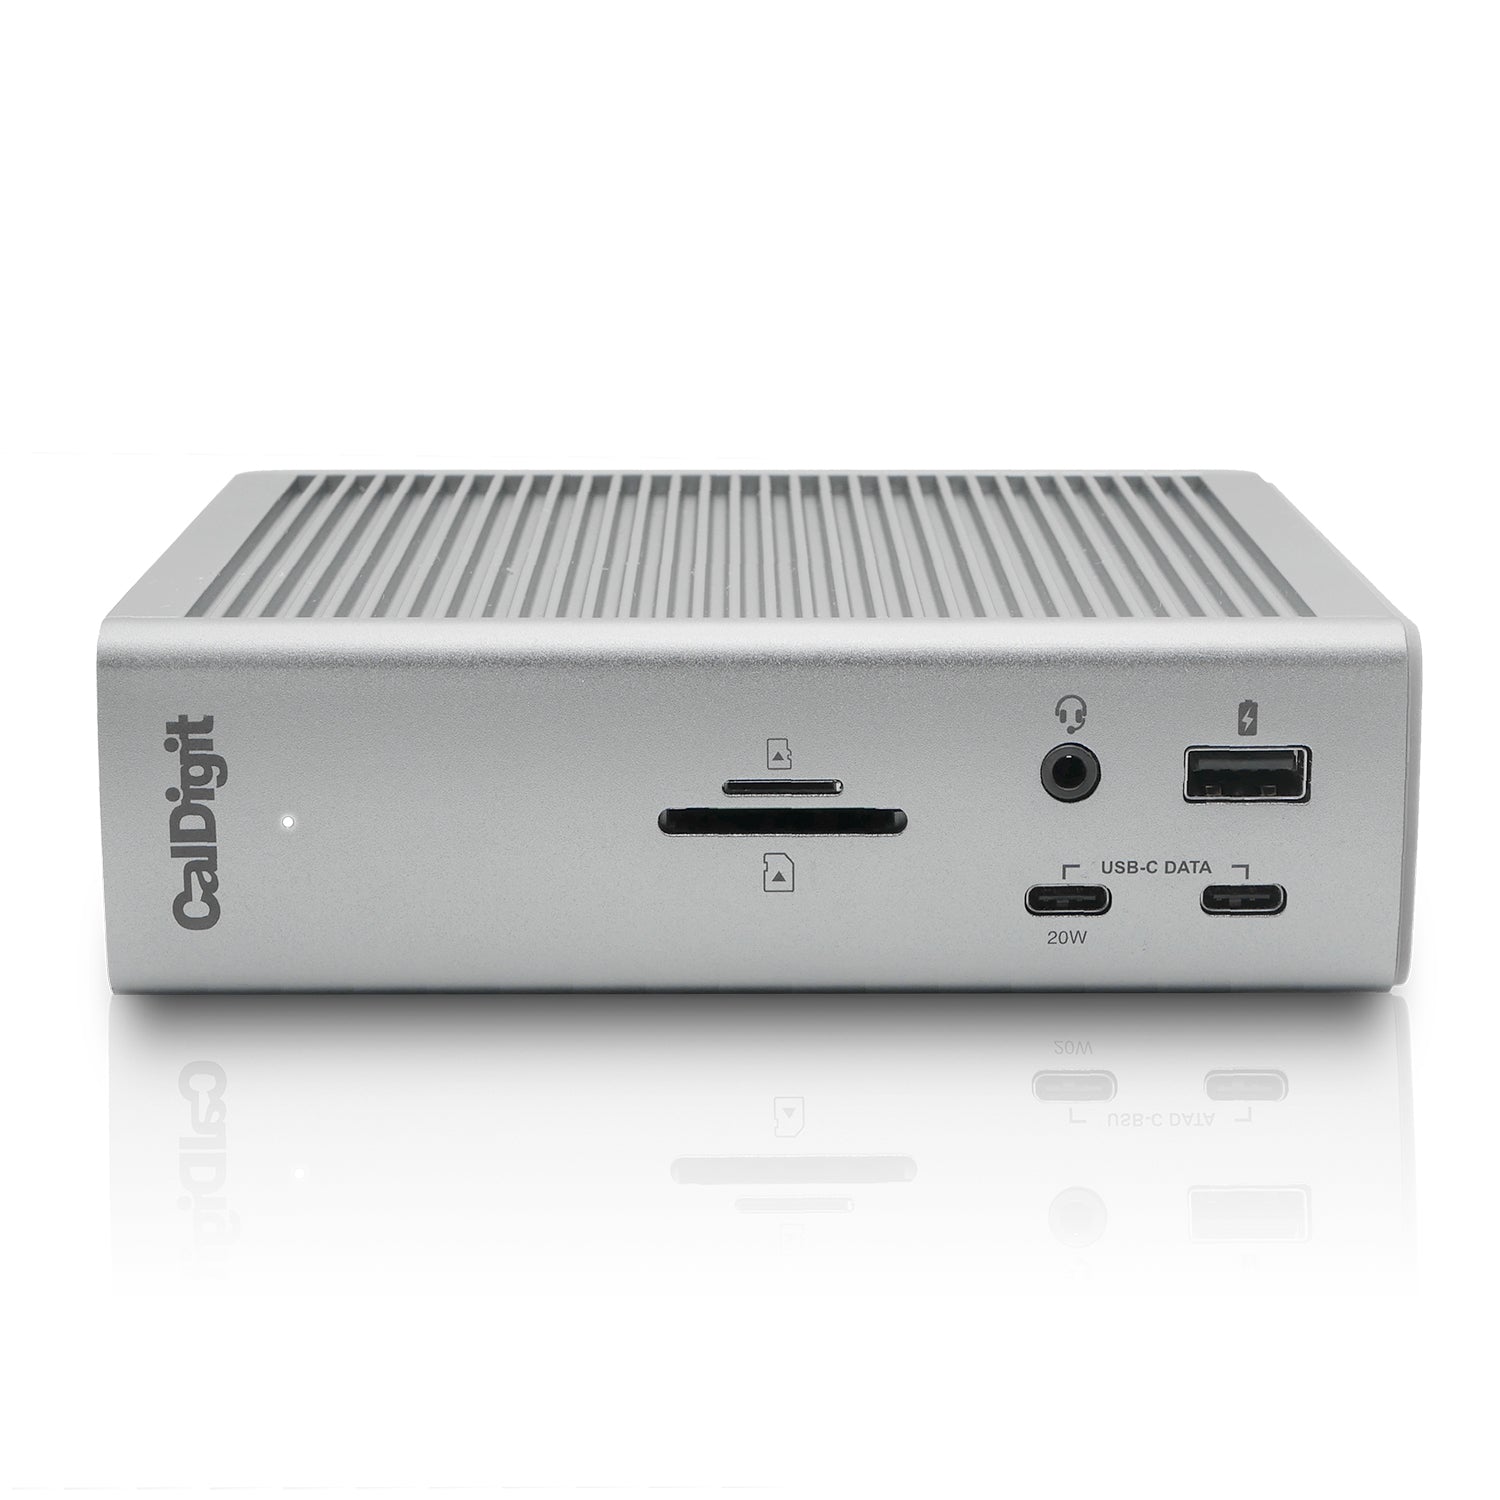 CalDigit TS4 Thunderbolt 4 Dock gives you 18 ports along with 98W laptop  charging » Gadget Flow